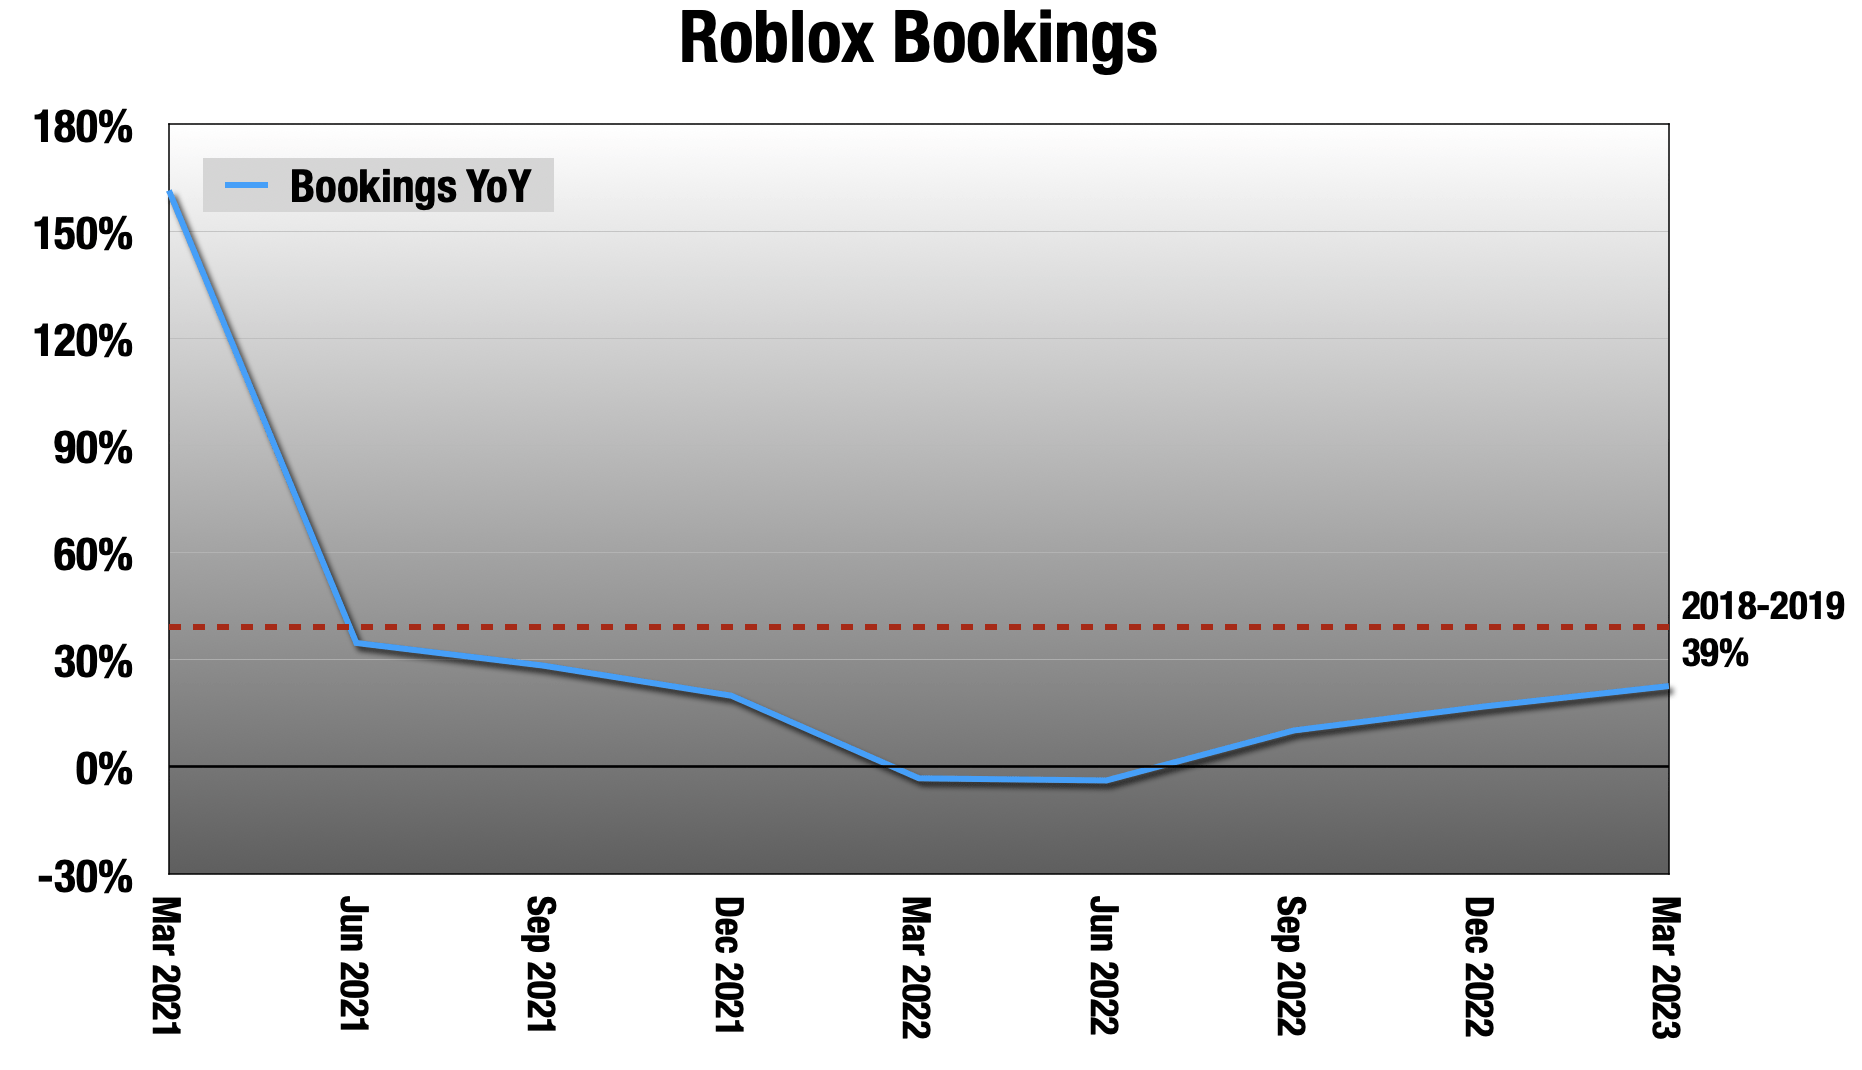 Roblox could deliver 2Q revenue and earnings upside surprises